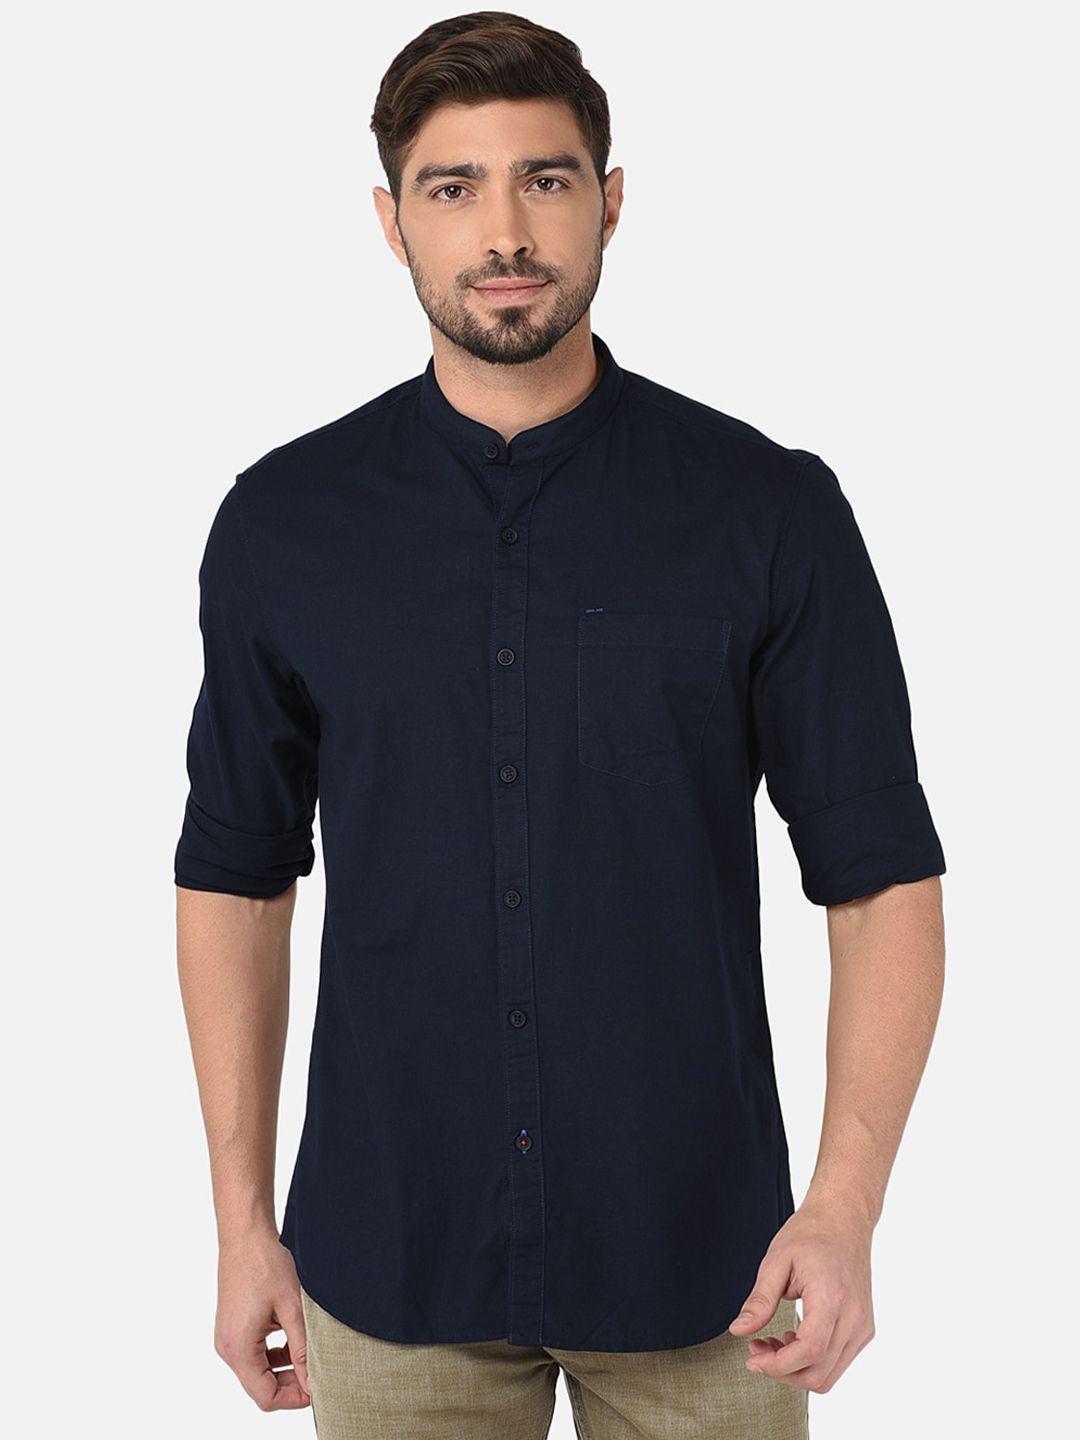 oxemberg men navy blue classic slim fit cotton casual shirt